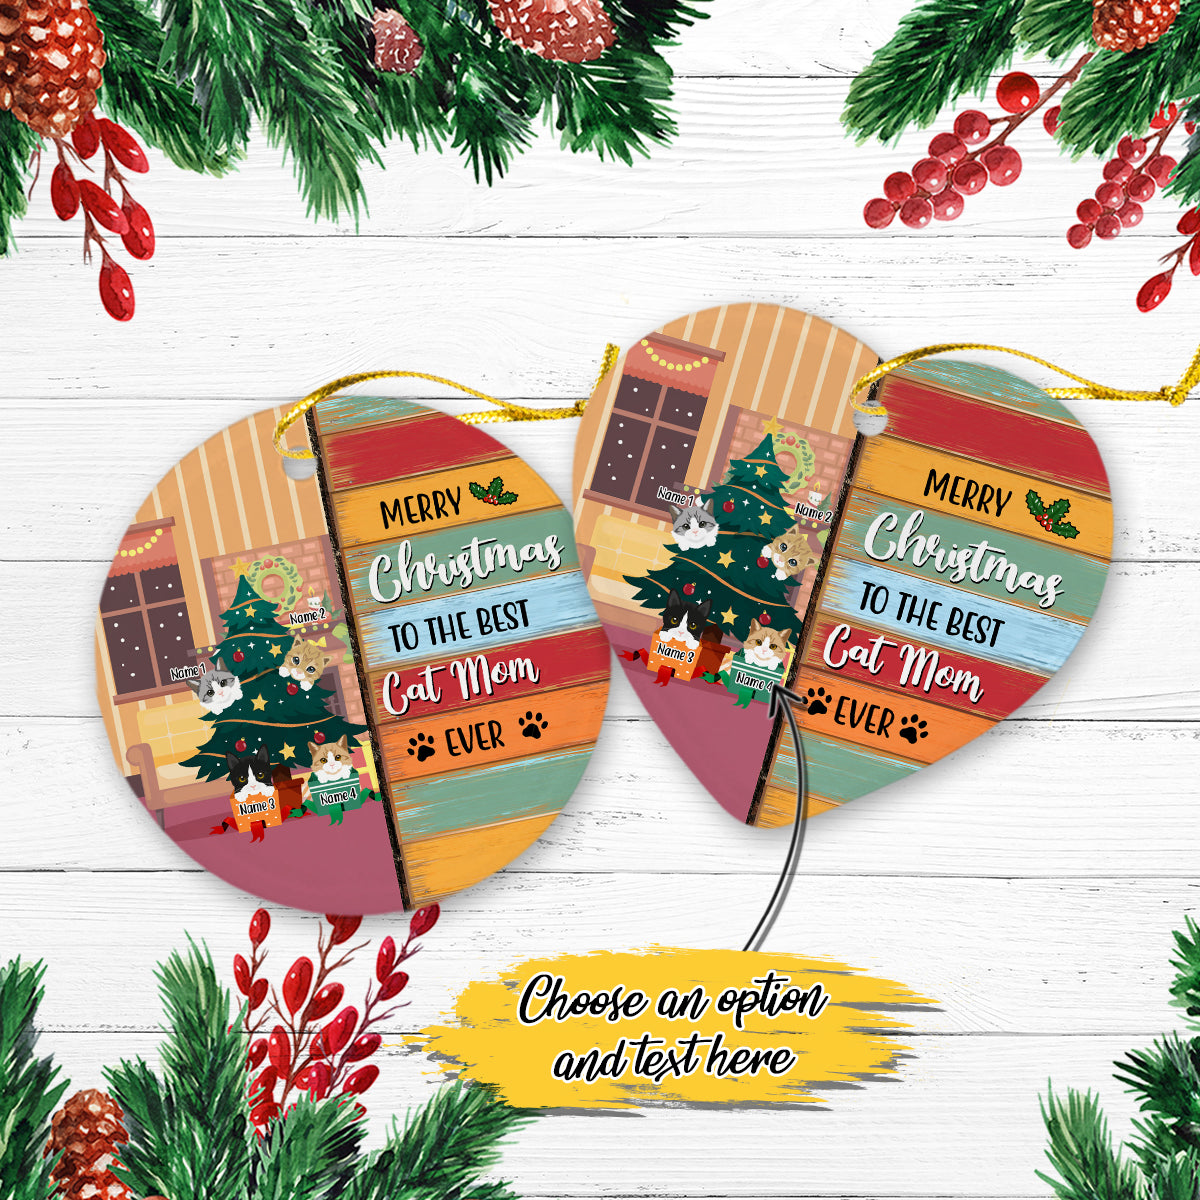 Best Cat Mom Ever Merry Christmas Personalized Christmas Premium Ceramic Ornaments Sets for Christmas Tree